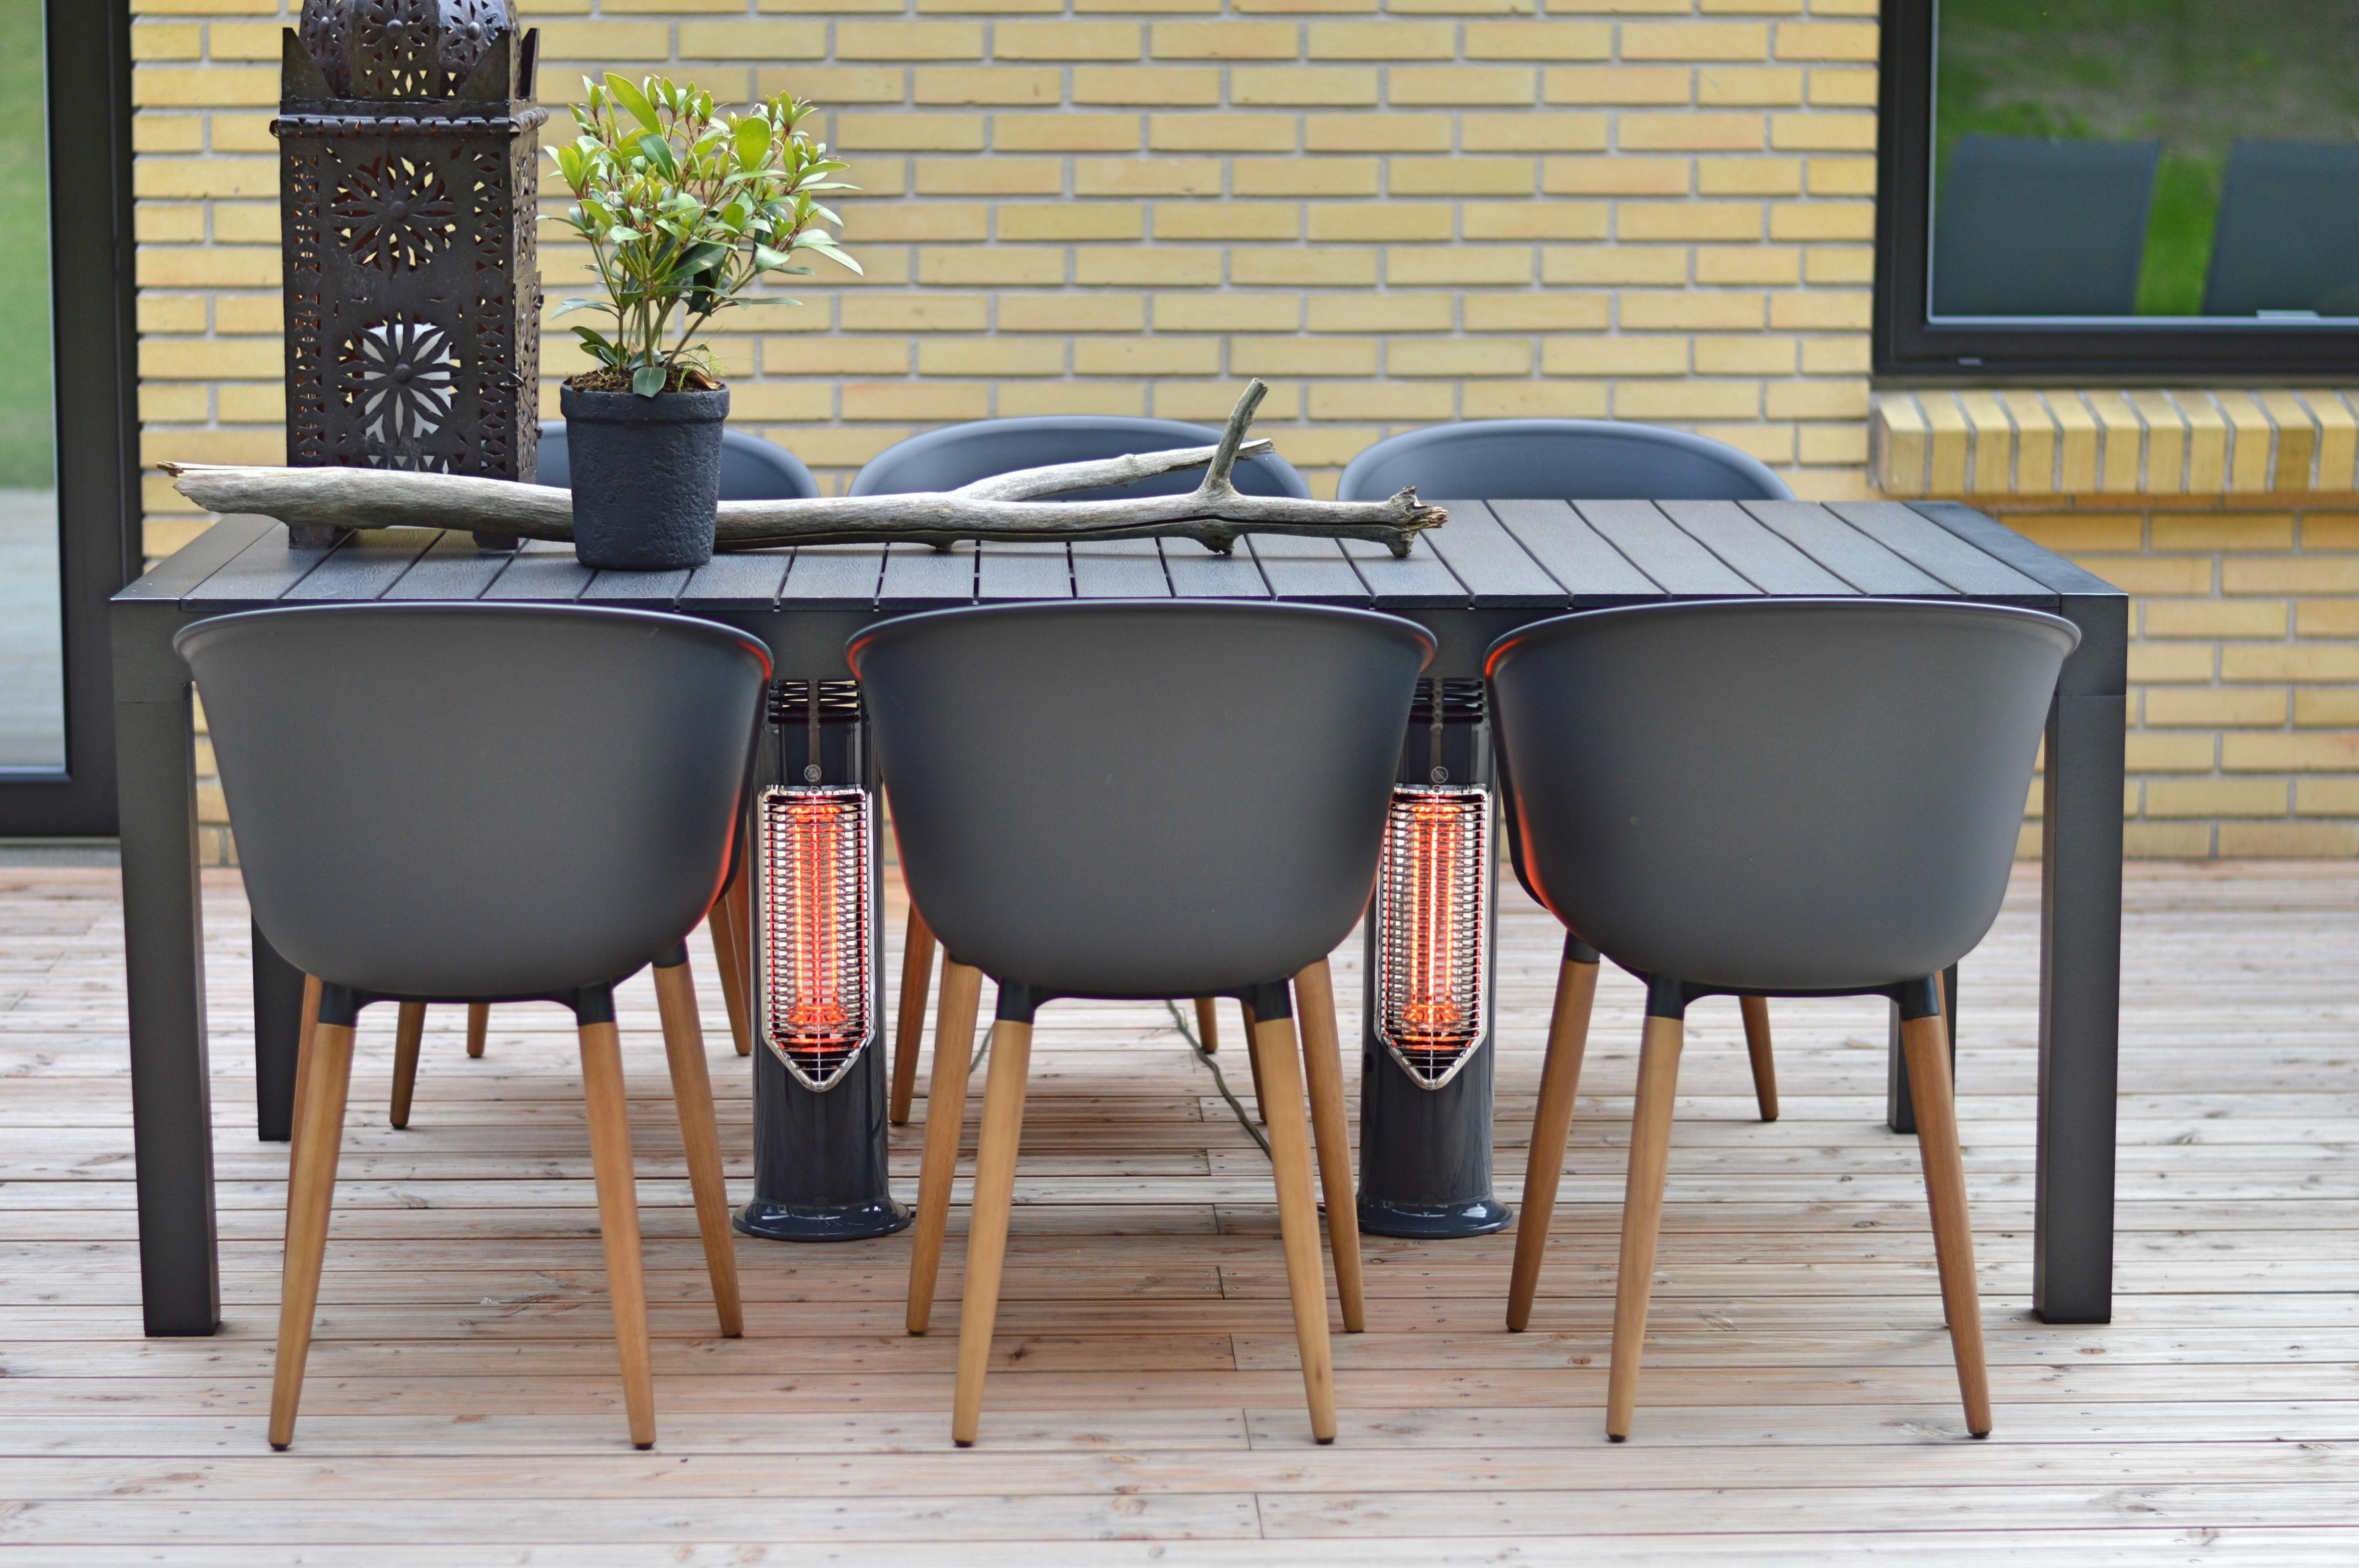 Outdoor Table Heating Safe To Touch Patio Heater Danish regarding size 5863 X 3898